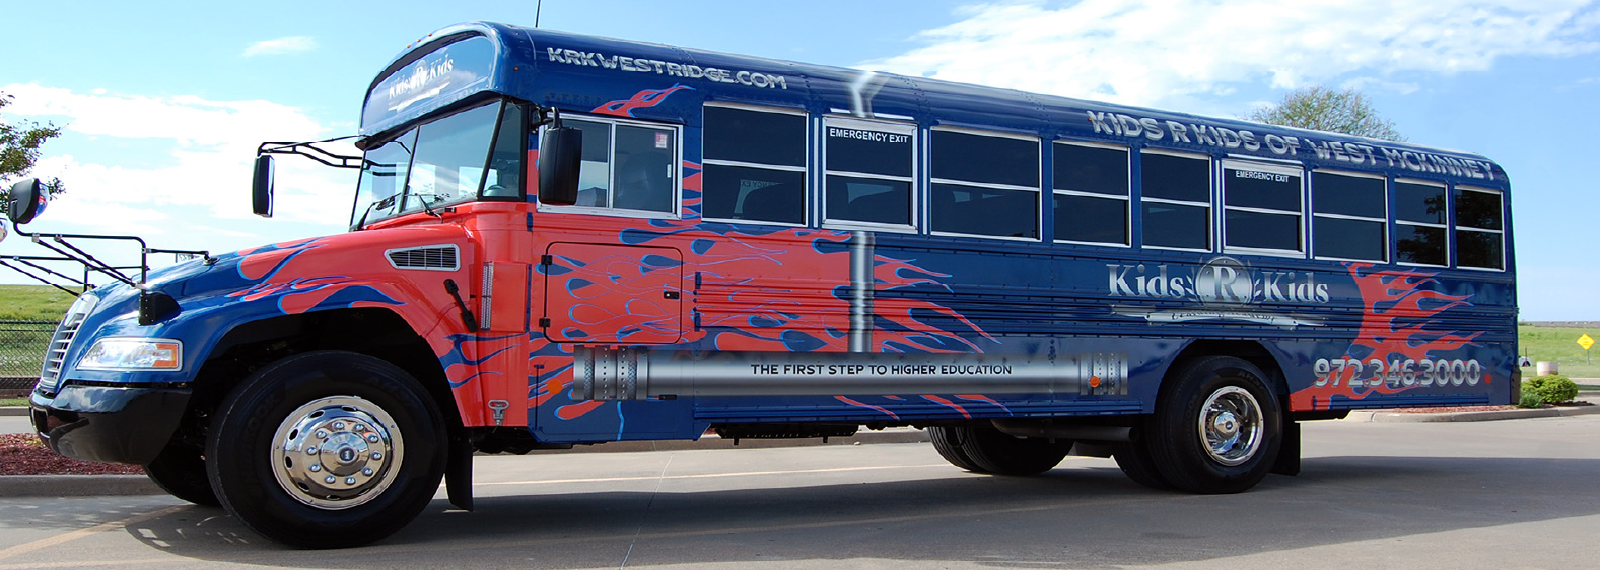 KidsRKids full sized school bus painted with custom graphics to look like Optimus Prime from The Transformers movie.  